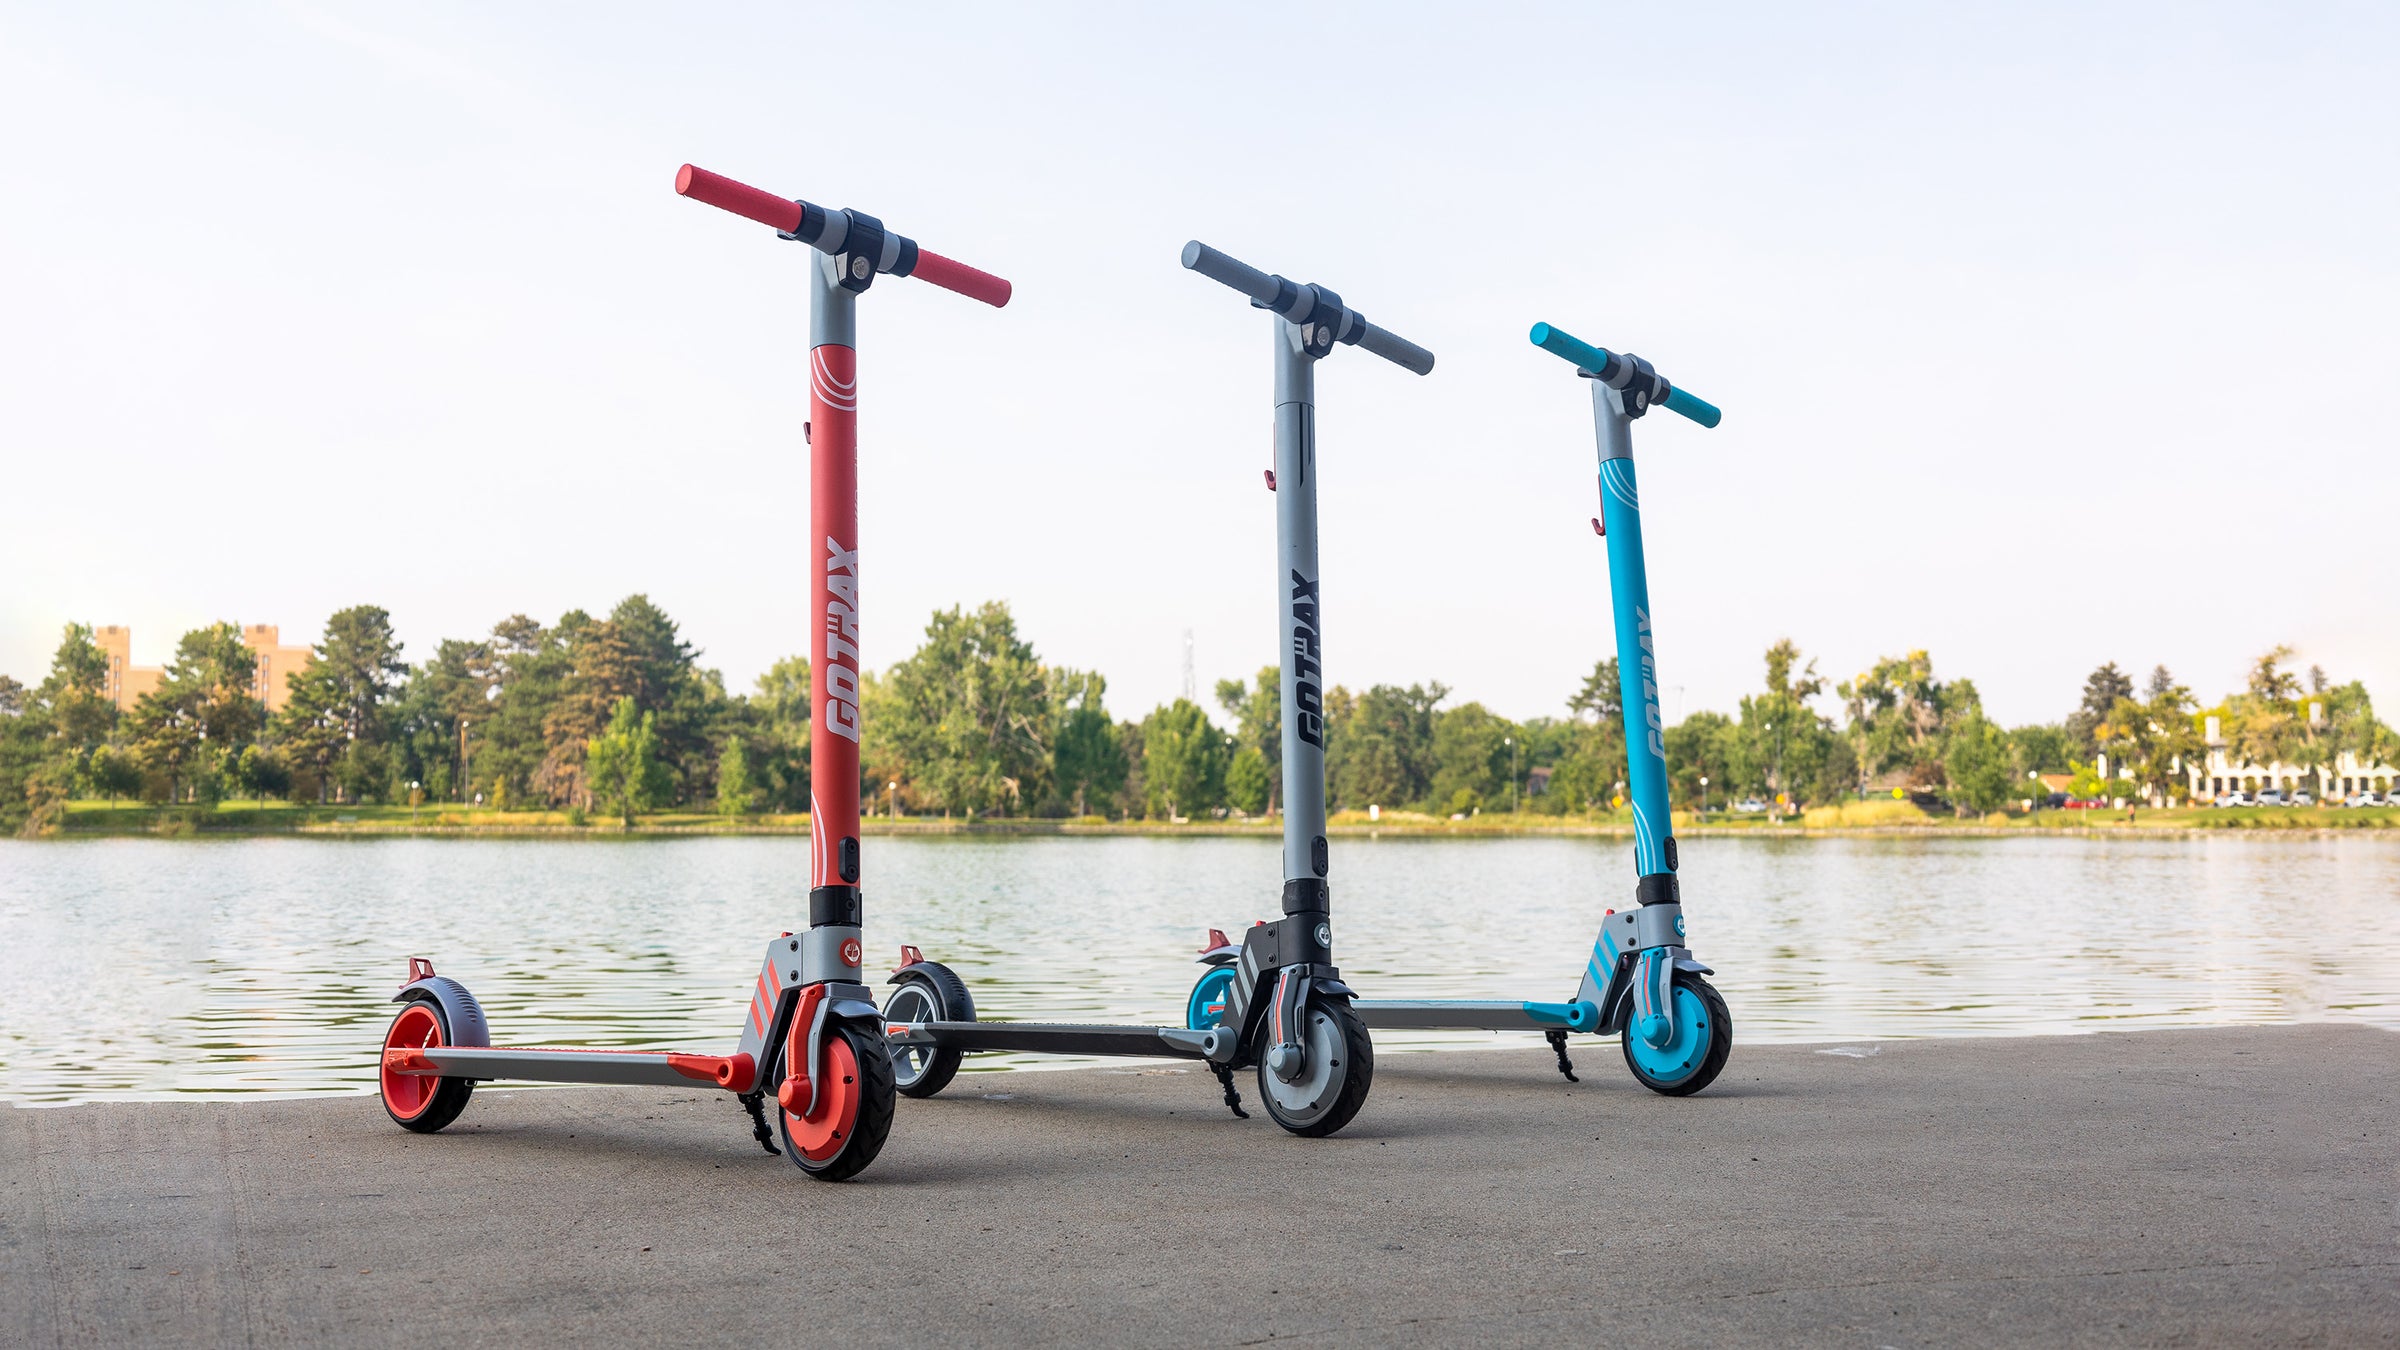 GOTRAX Red, Gray, and Teal Vibe Electric Scooter for Teens in a Park